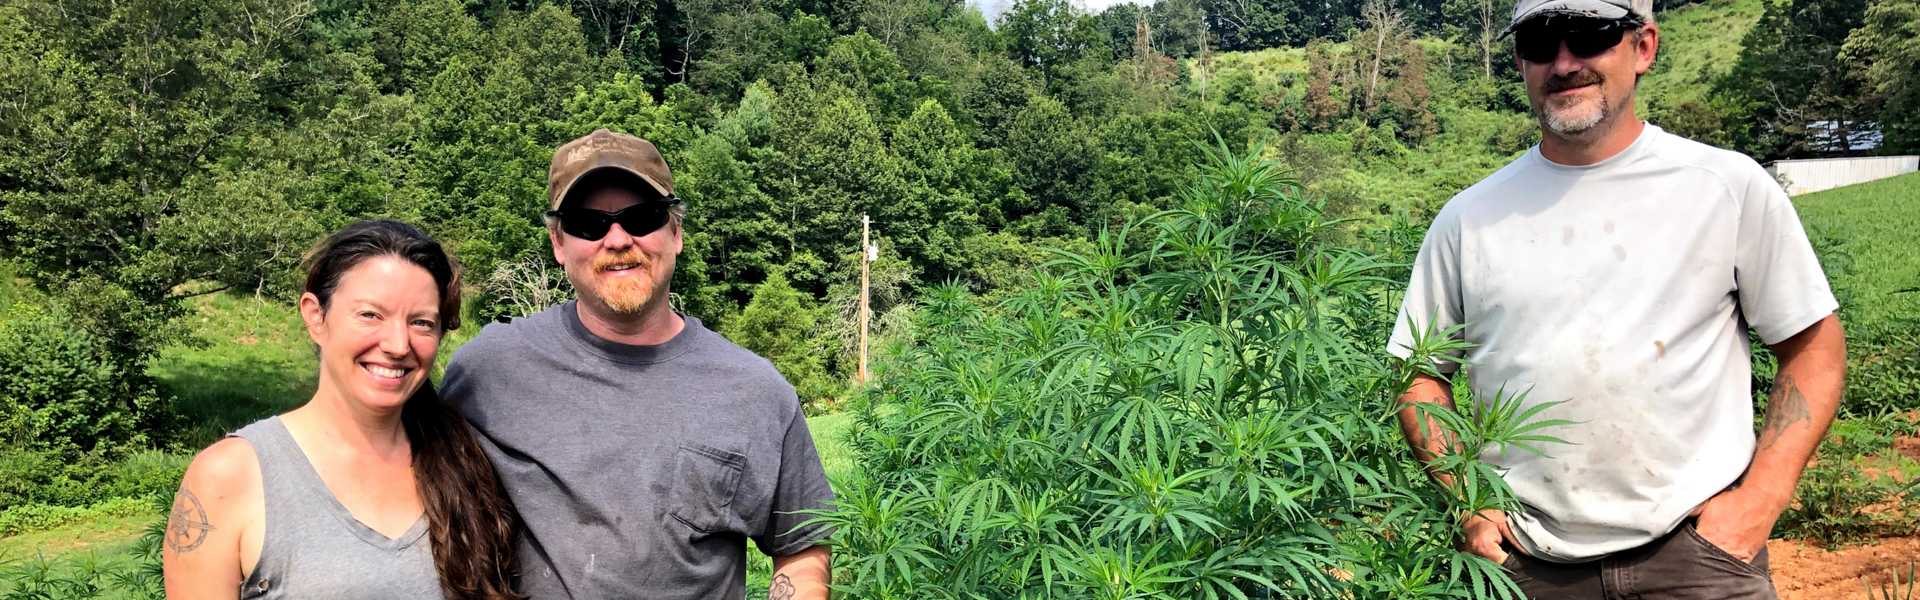 In Madison County, hemp is here to stay